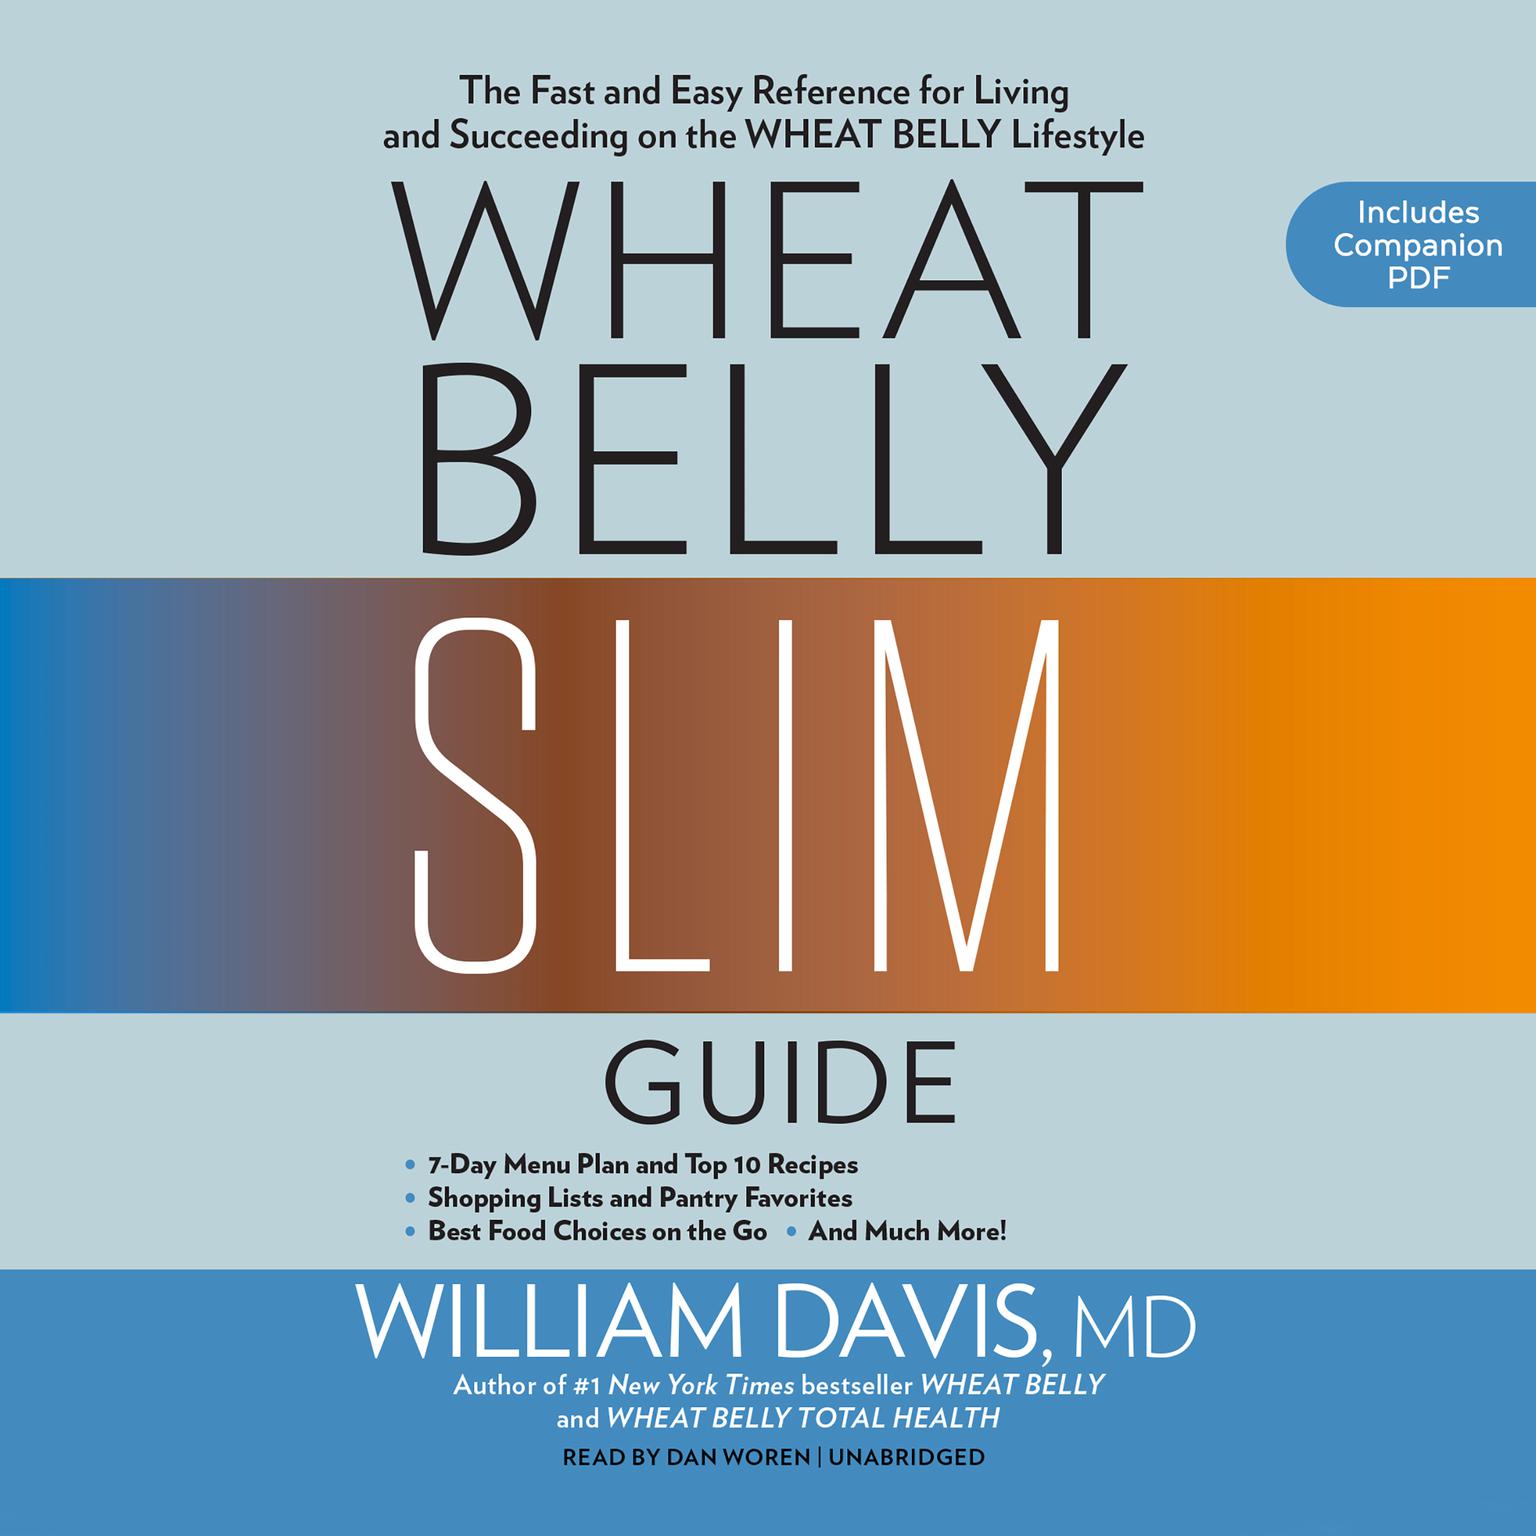 Wheat Belly Slim Guide: The Fast and Easy Reference for Living and Succeeding on the Wheat Belly Lifestyle Audiobook, by William Davis